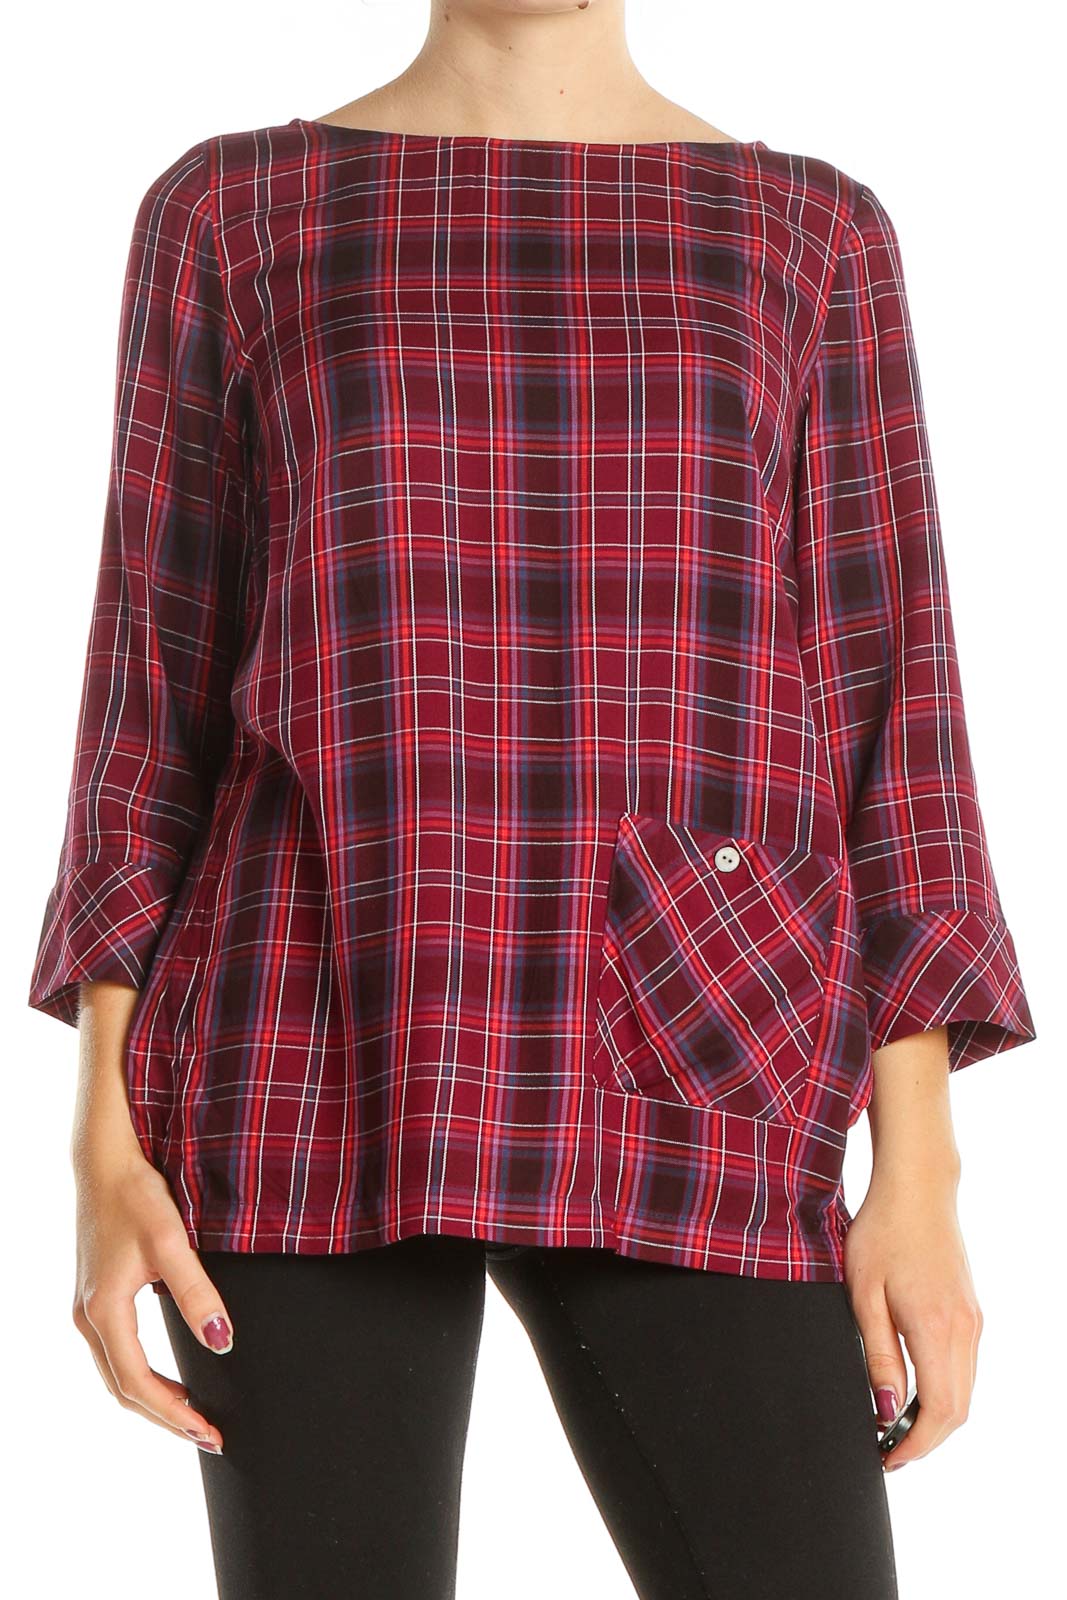 Red Checkered Chic Top Front